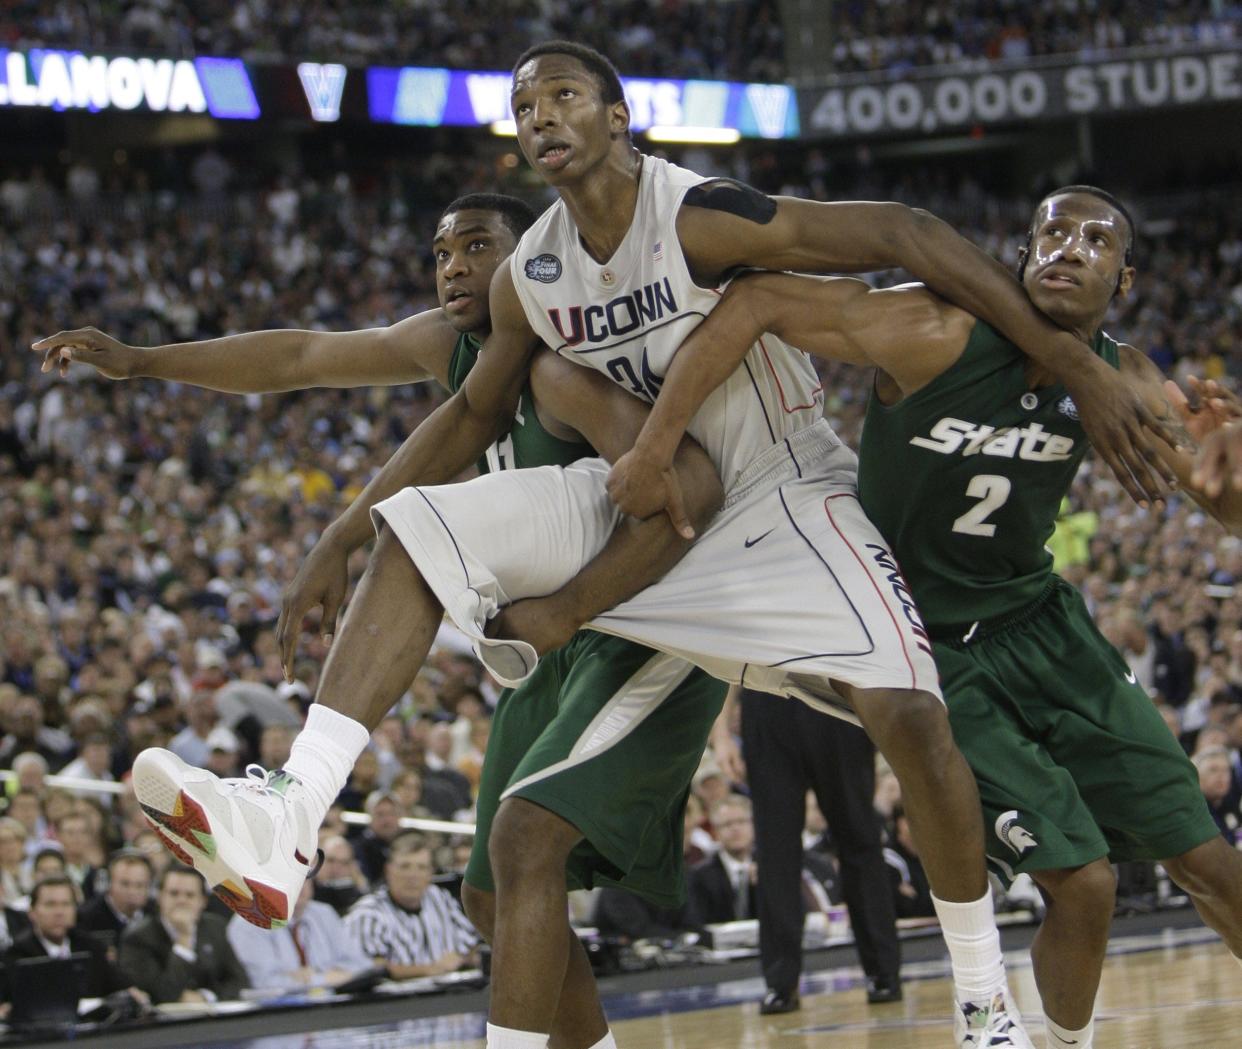 Connecticut's Hasheem Thabeet battles with Michigan State's Raymar Morgan and Marquise Gray for position during 1st half action between the Michigan State Spartans and the Connecticut Huskies in the Mens NCAA Final Four semi-final game, at Ford Field in Detroit on April 4, 2008.